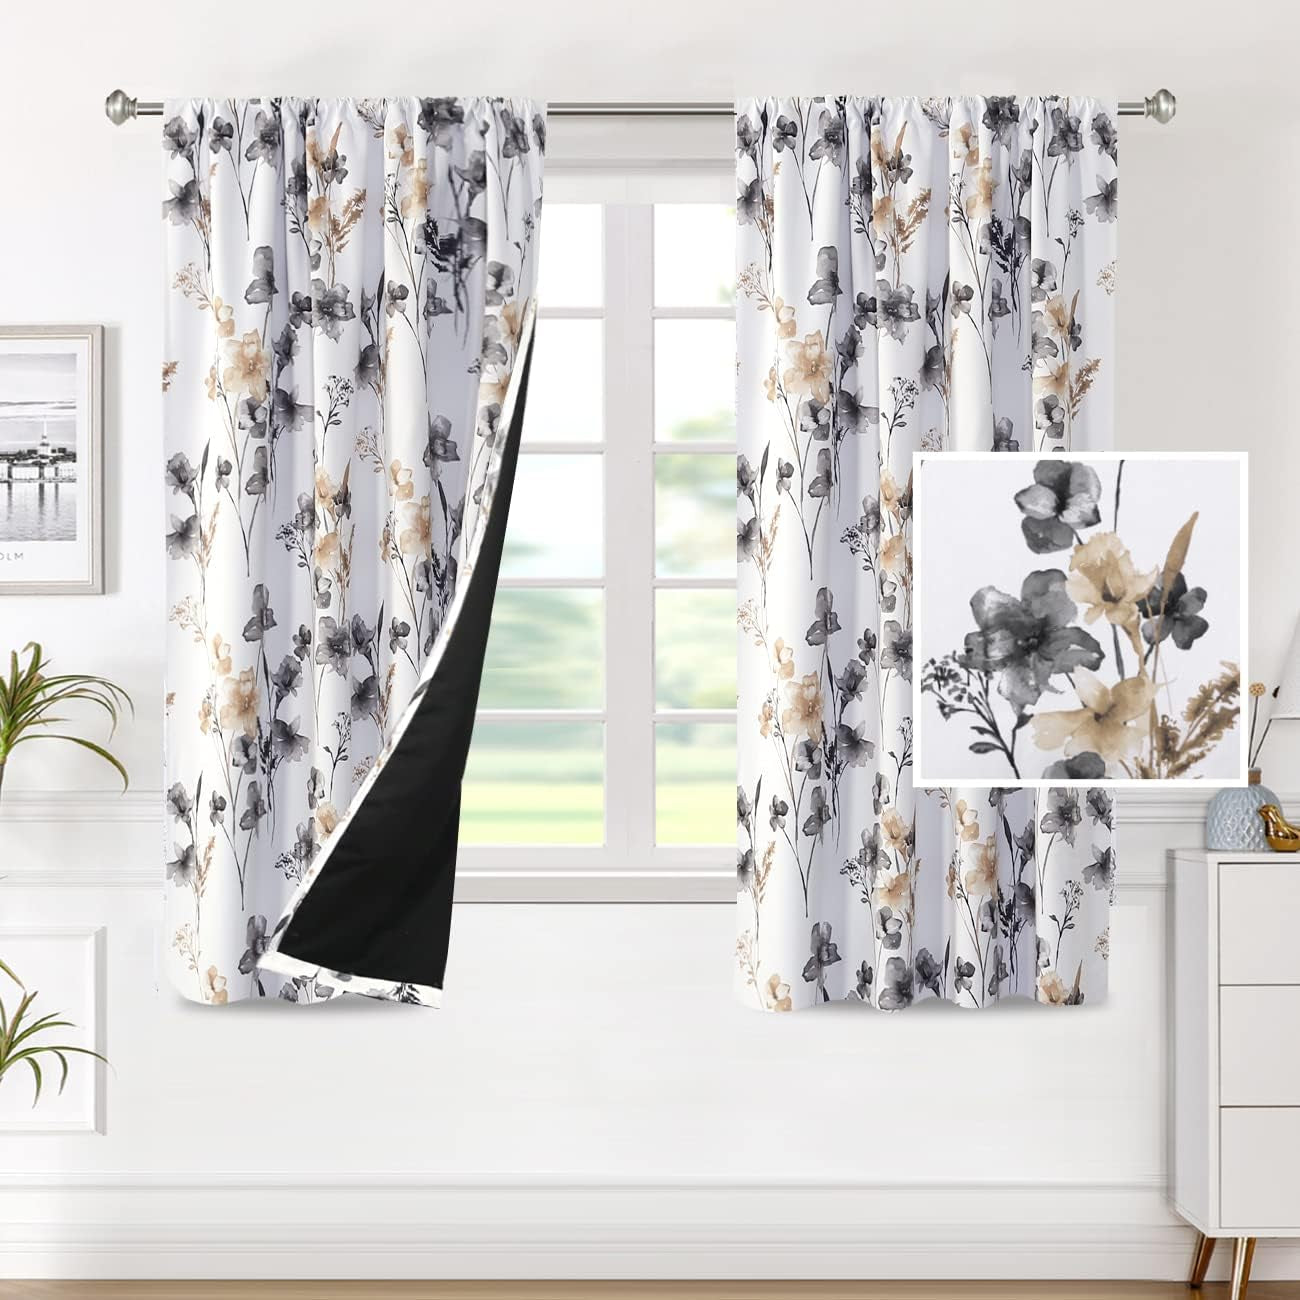 H.VERSAILTEX 100% Blackout Curtains for Bedroom Cattleya Floral Printed Drapes 84 Inches Long Leah Floral Pattern Full Light Blocking Drapes with Black Liner Rod Pocket 2 Panels, Navy/Taupe  H.VERSAILTEX Grey/Taupe 52"W X 63"L 